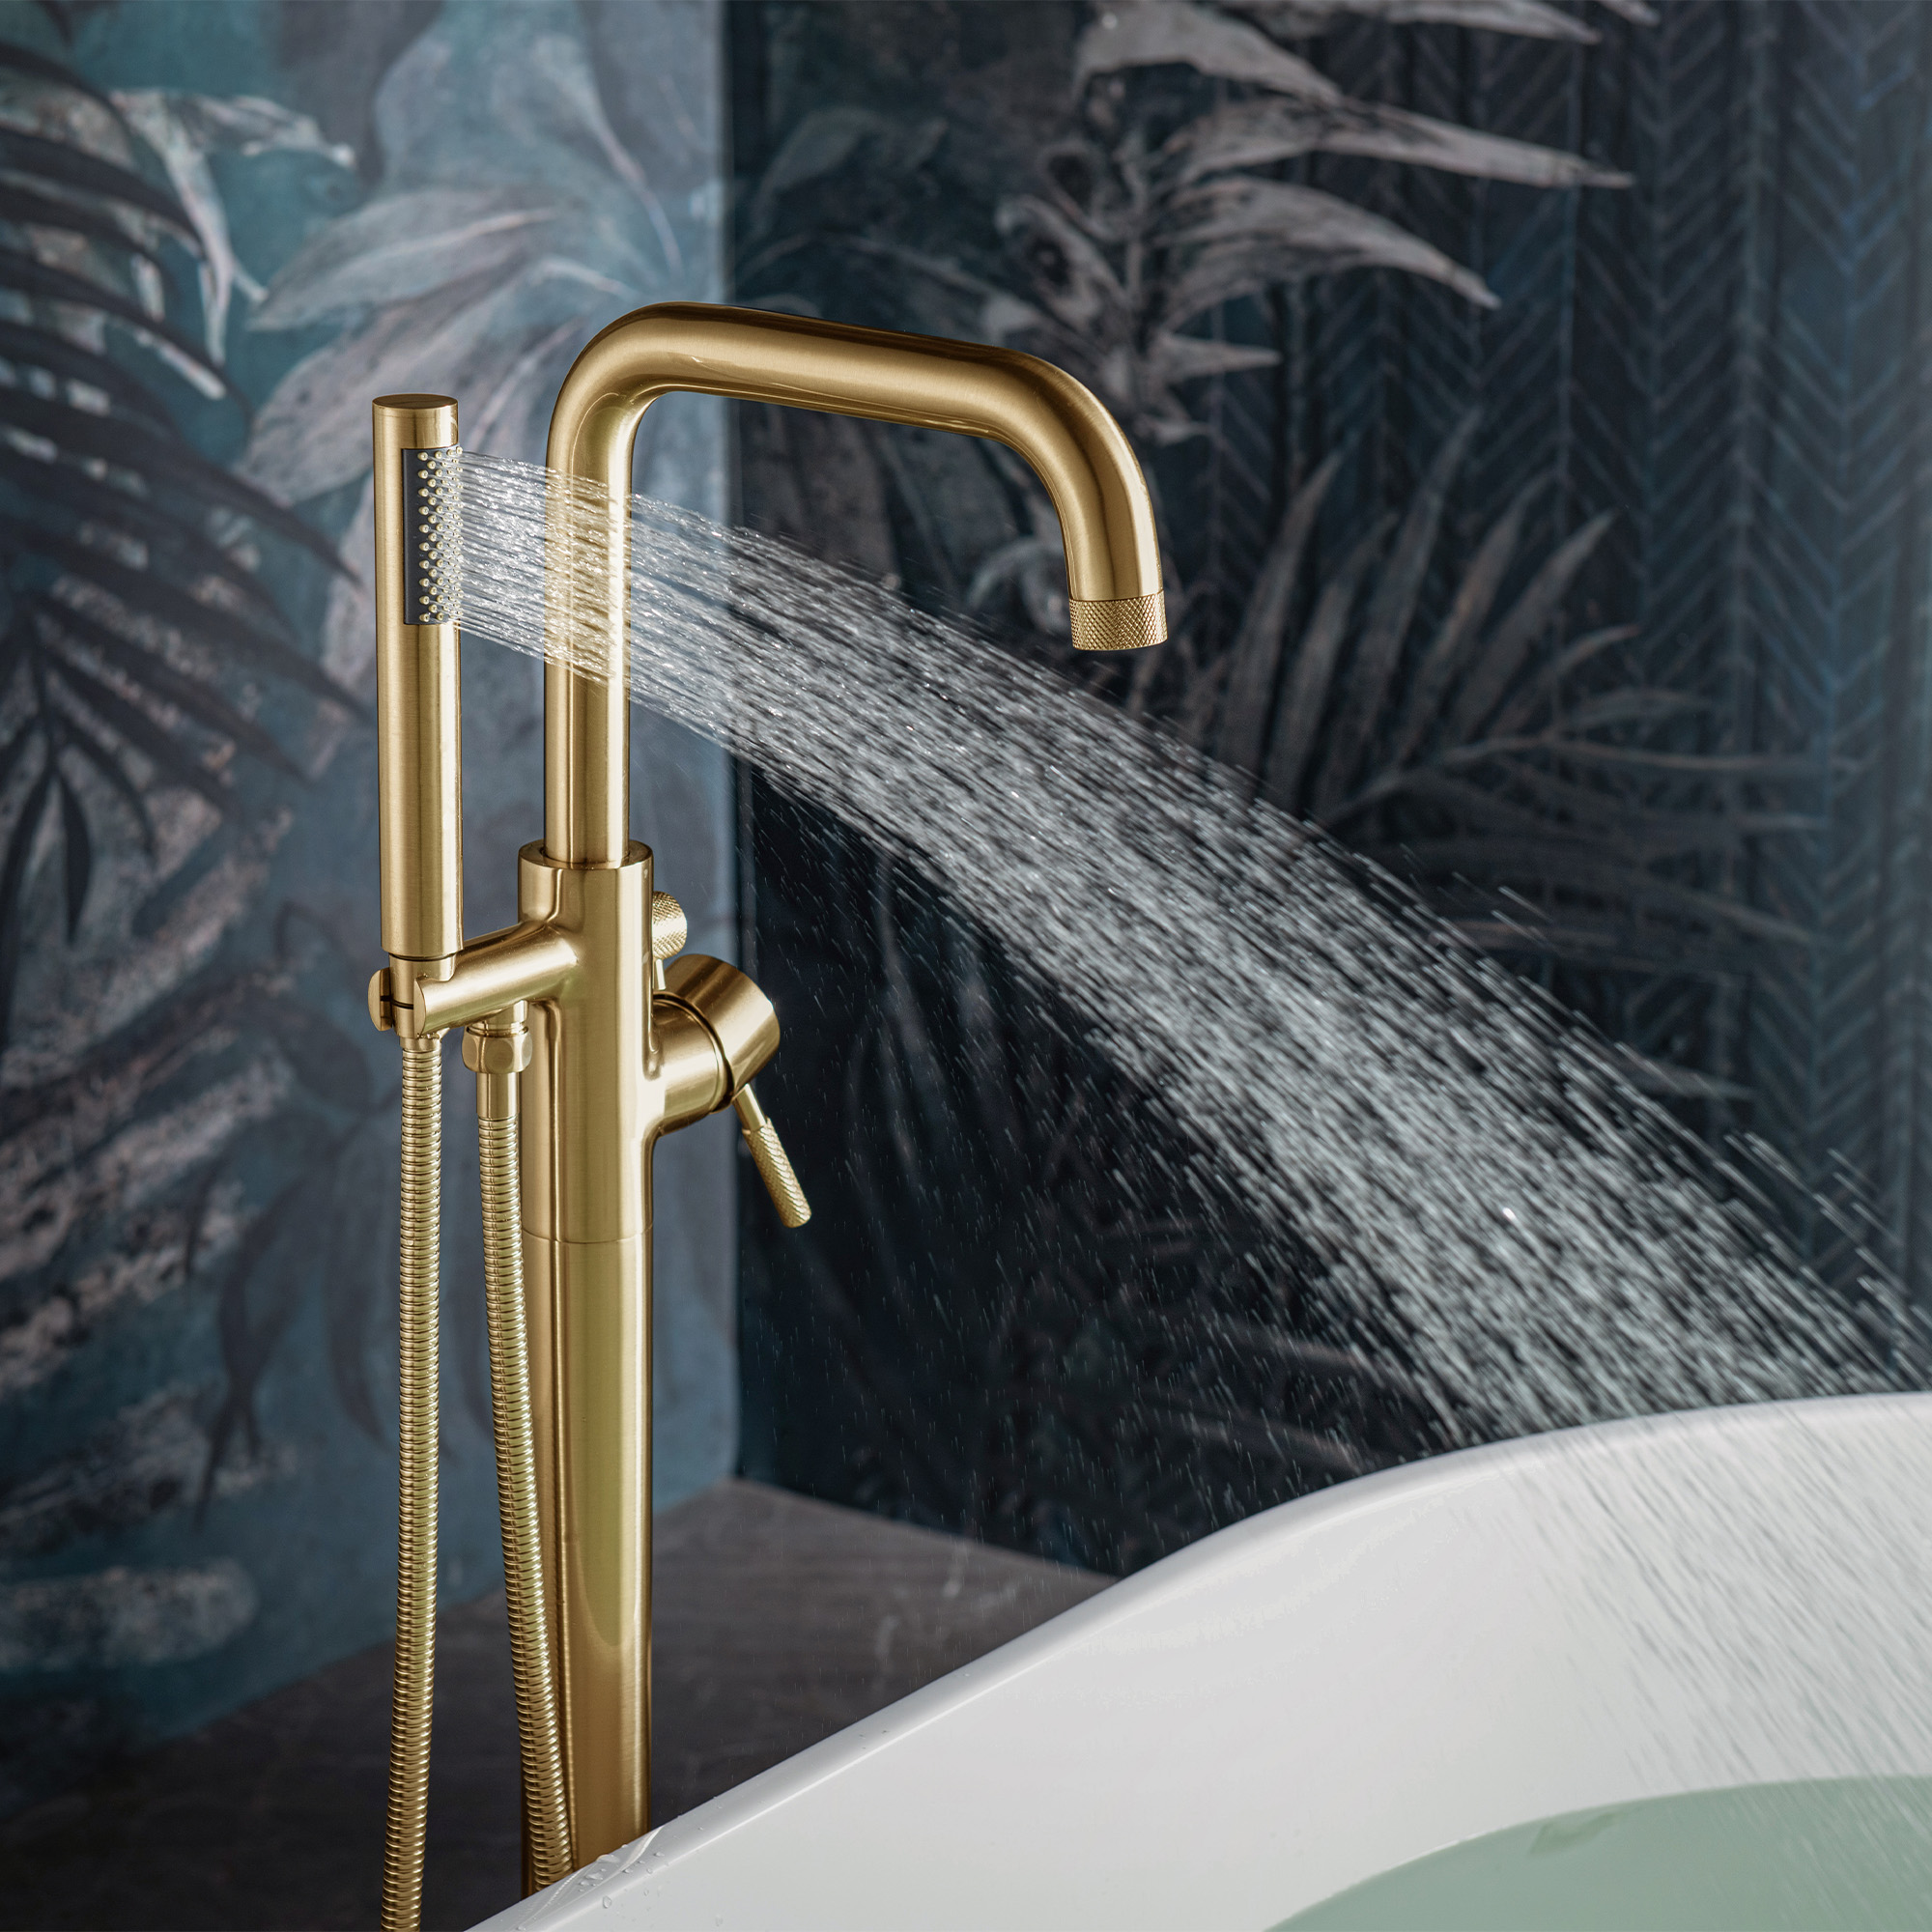  WOODBRIDGE F0073BGRD Contemporary Single Handle Floor Mount Freestanding Tub Filler Faucet with Cylinder Style Hand Shower in Brushed Gold Finish._14803